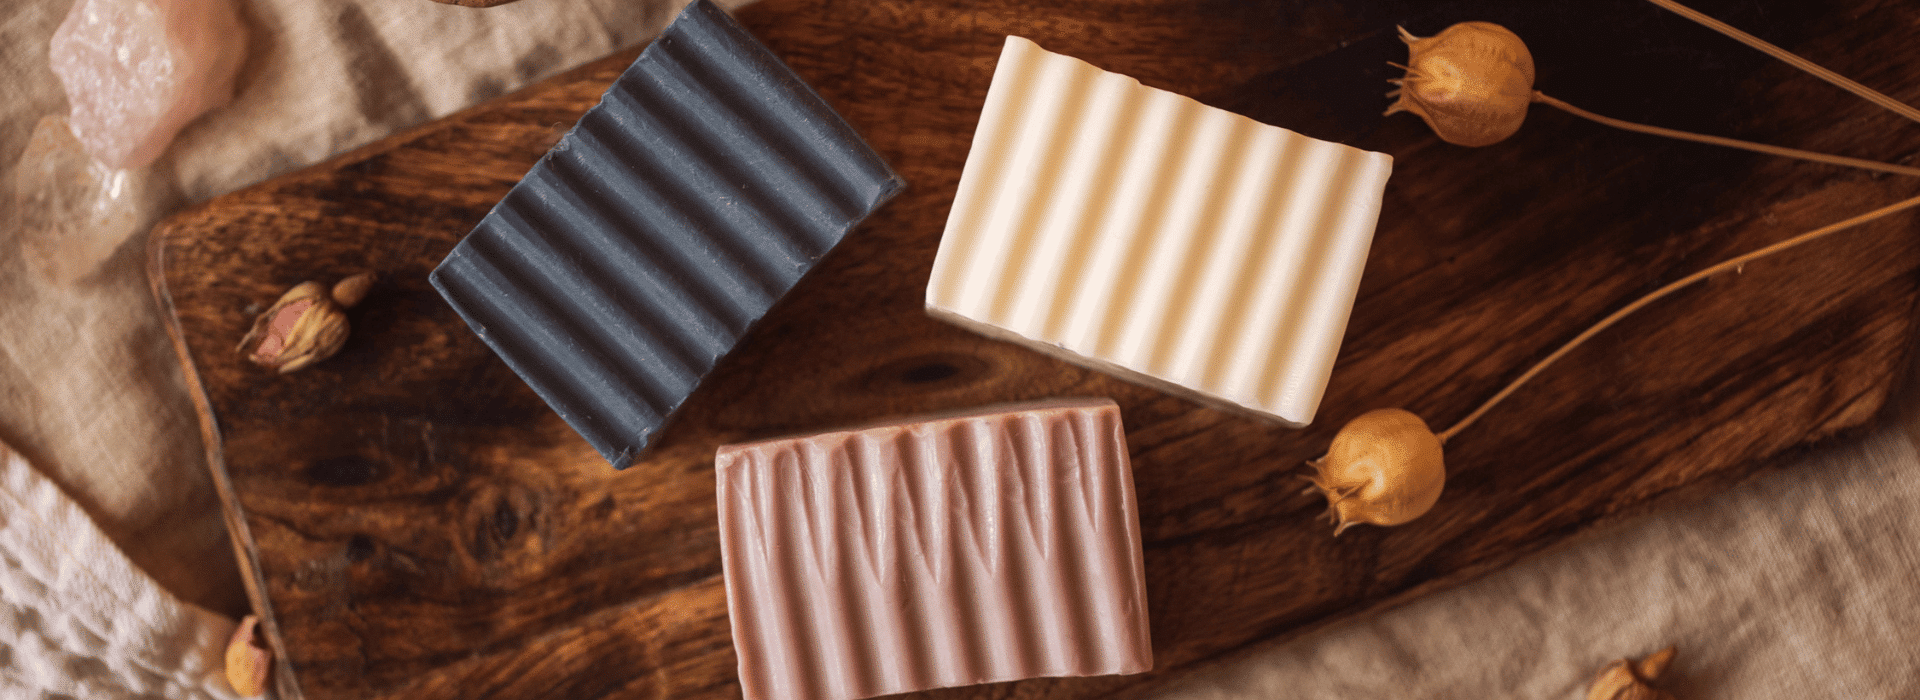 Throat, Third Eye and Crown Chakra soaps unwrapped on wooden board | The Secret to Breathing Well Blog | Shine Body & Bath Chakra Soap | Blog